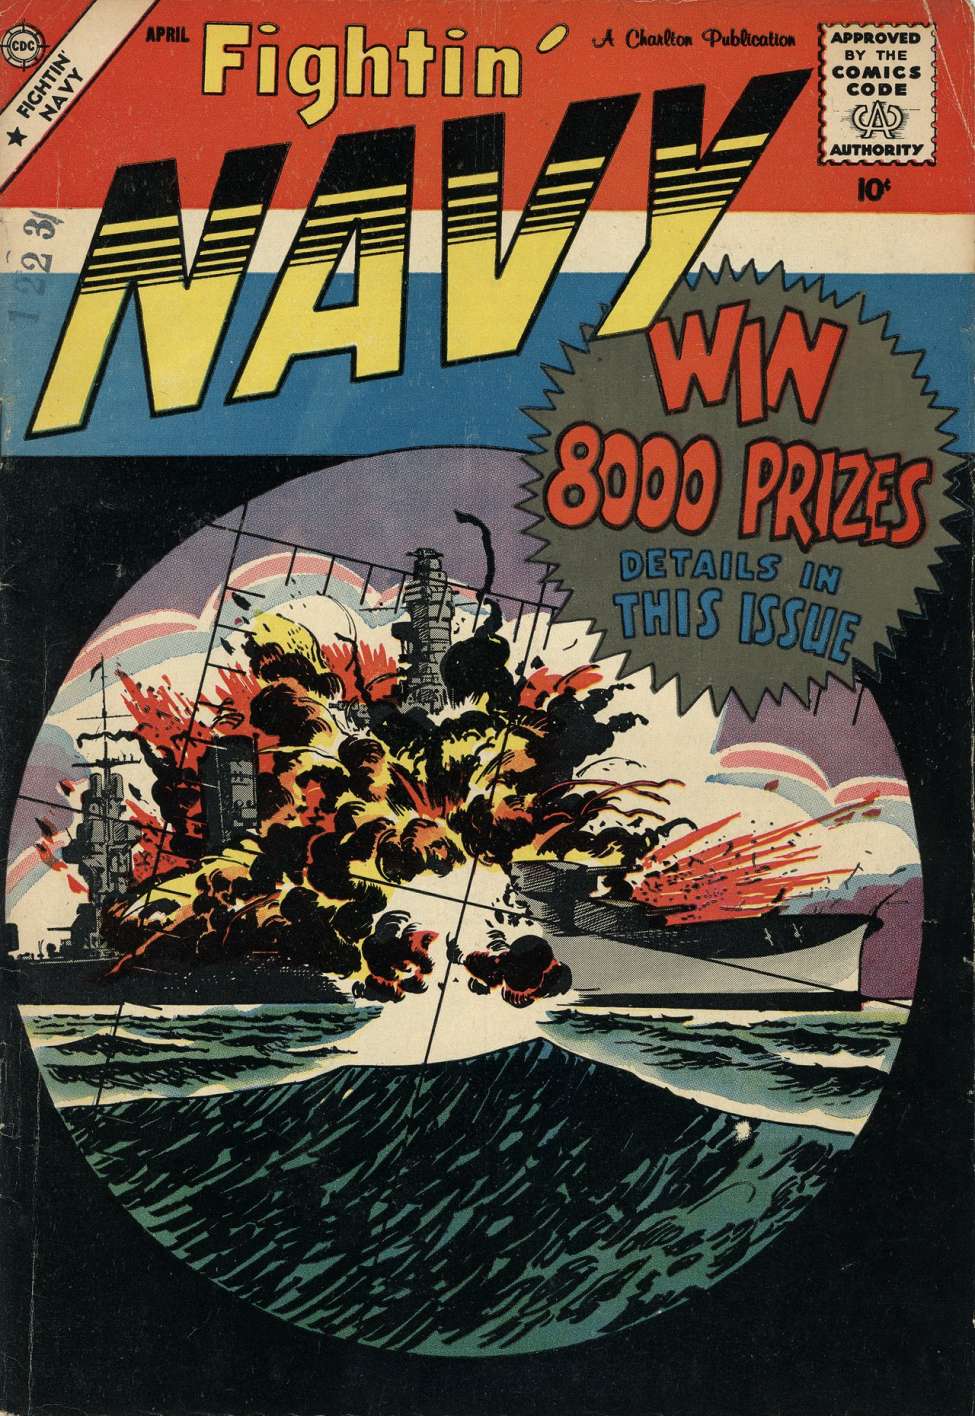 Book Cover For Fightin' Navy 86